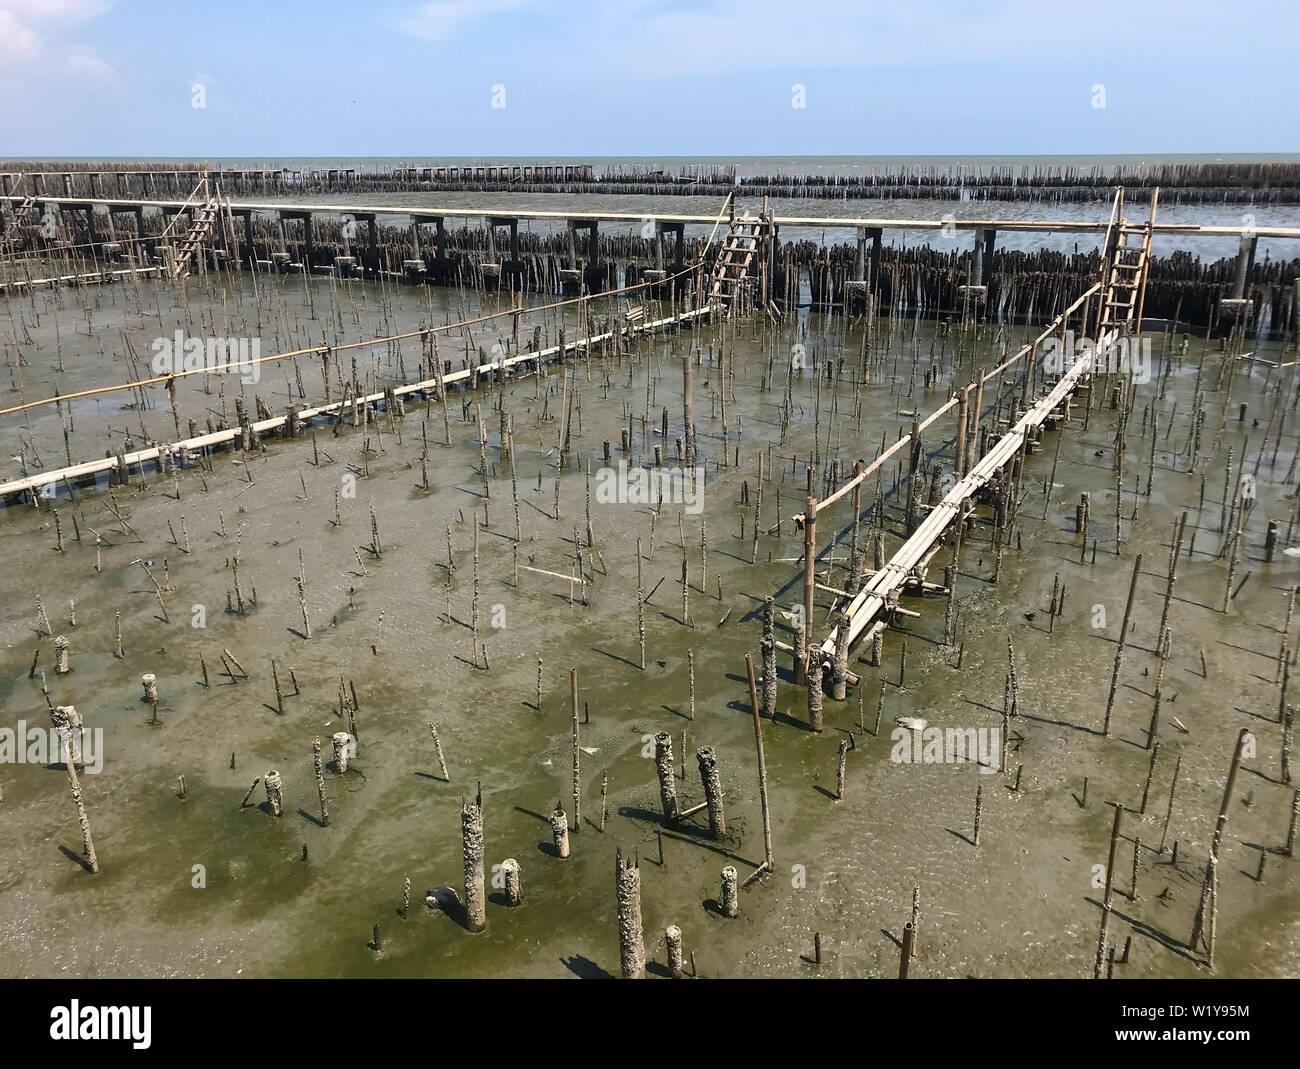 A land erosion protection - The rows of bamboo sticks on seashore for wave breaking about barriers, Samut Sakhon, Thailand. Stock Photo